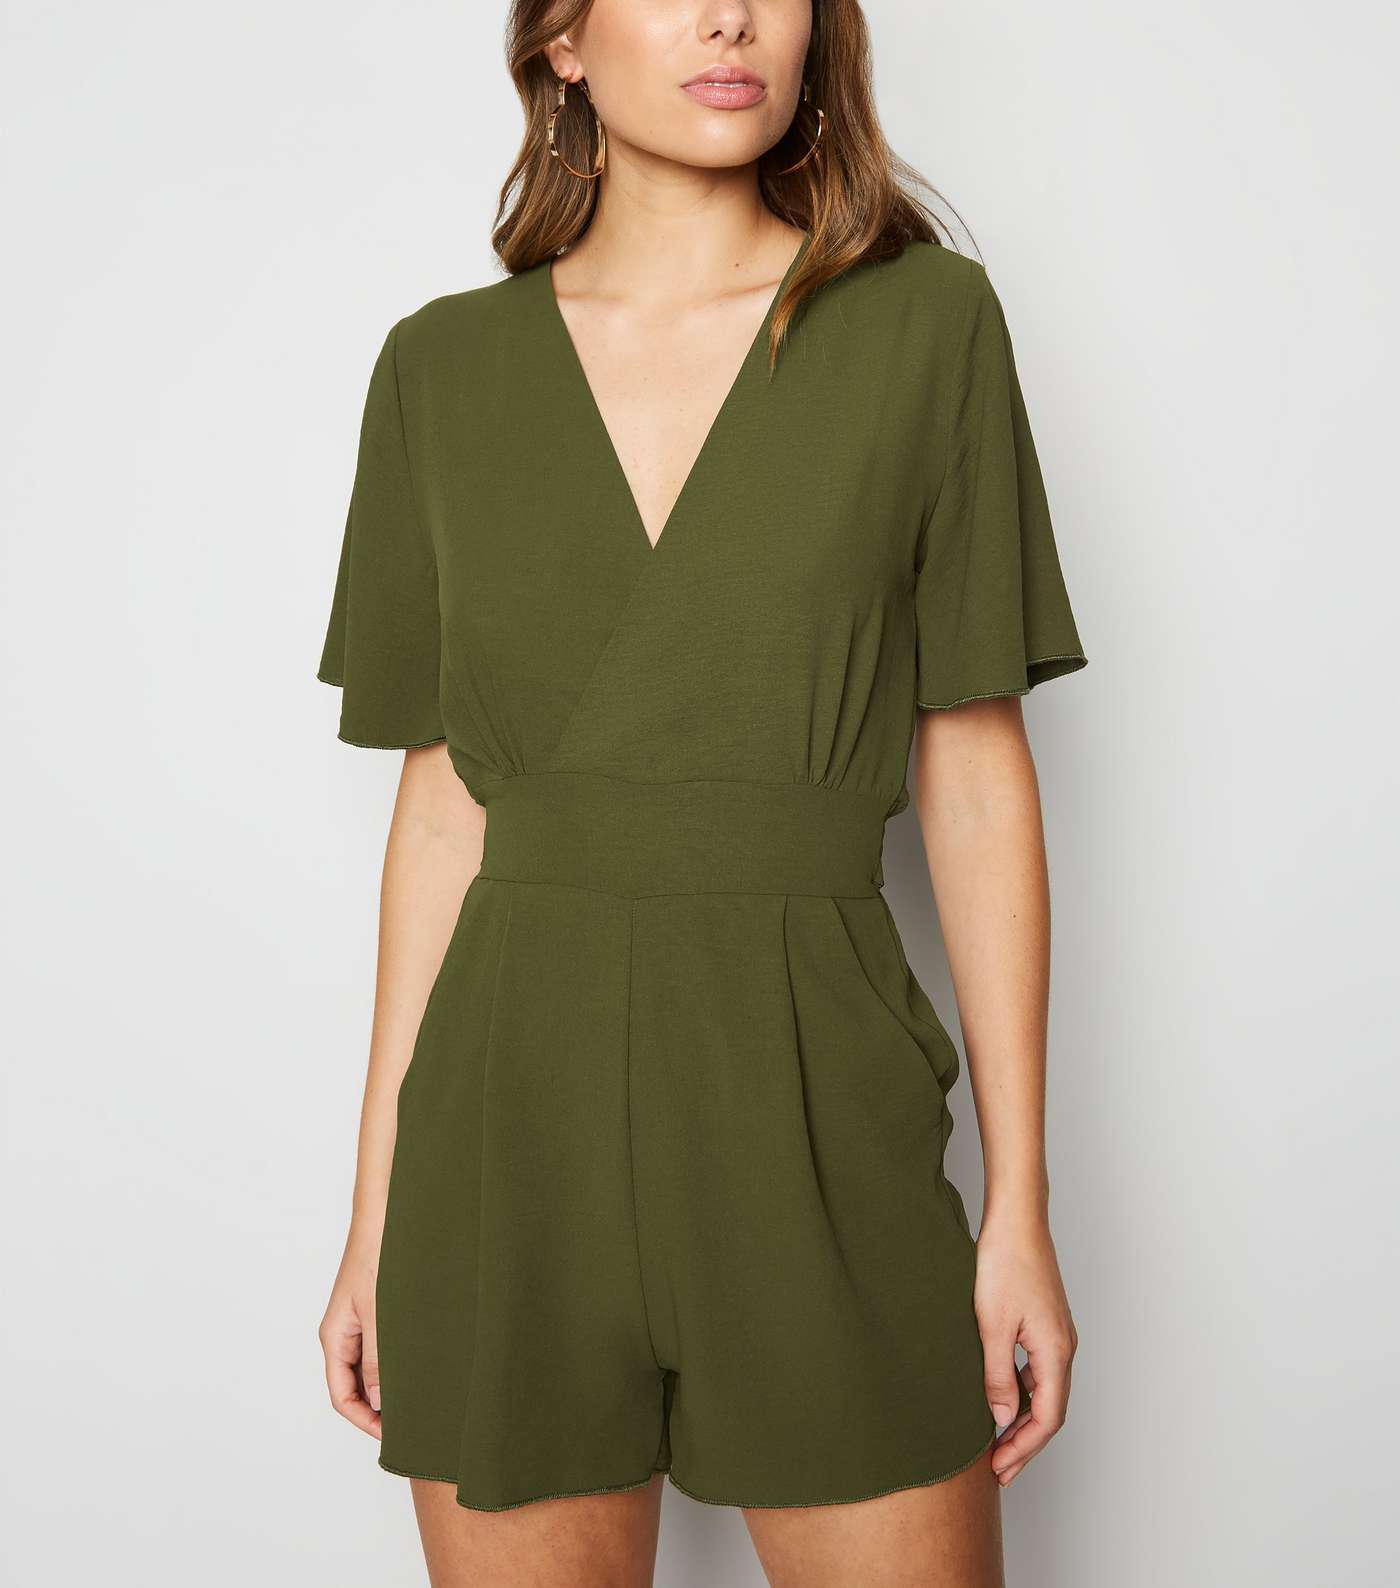 Cameo Rose Olive Wrap Playsuit